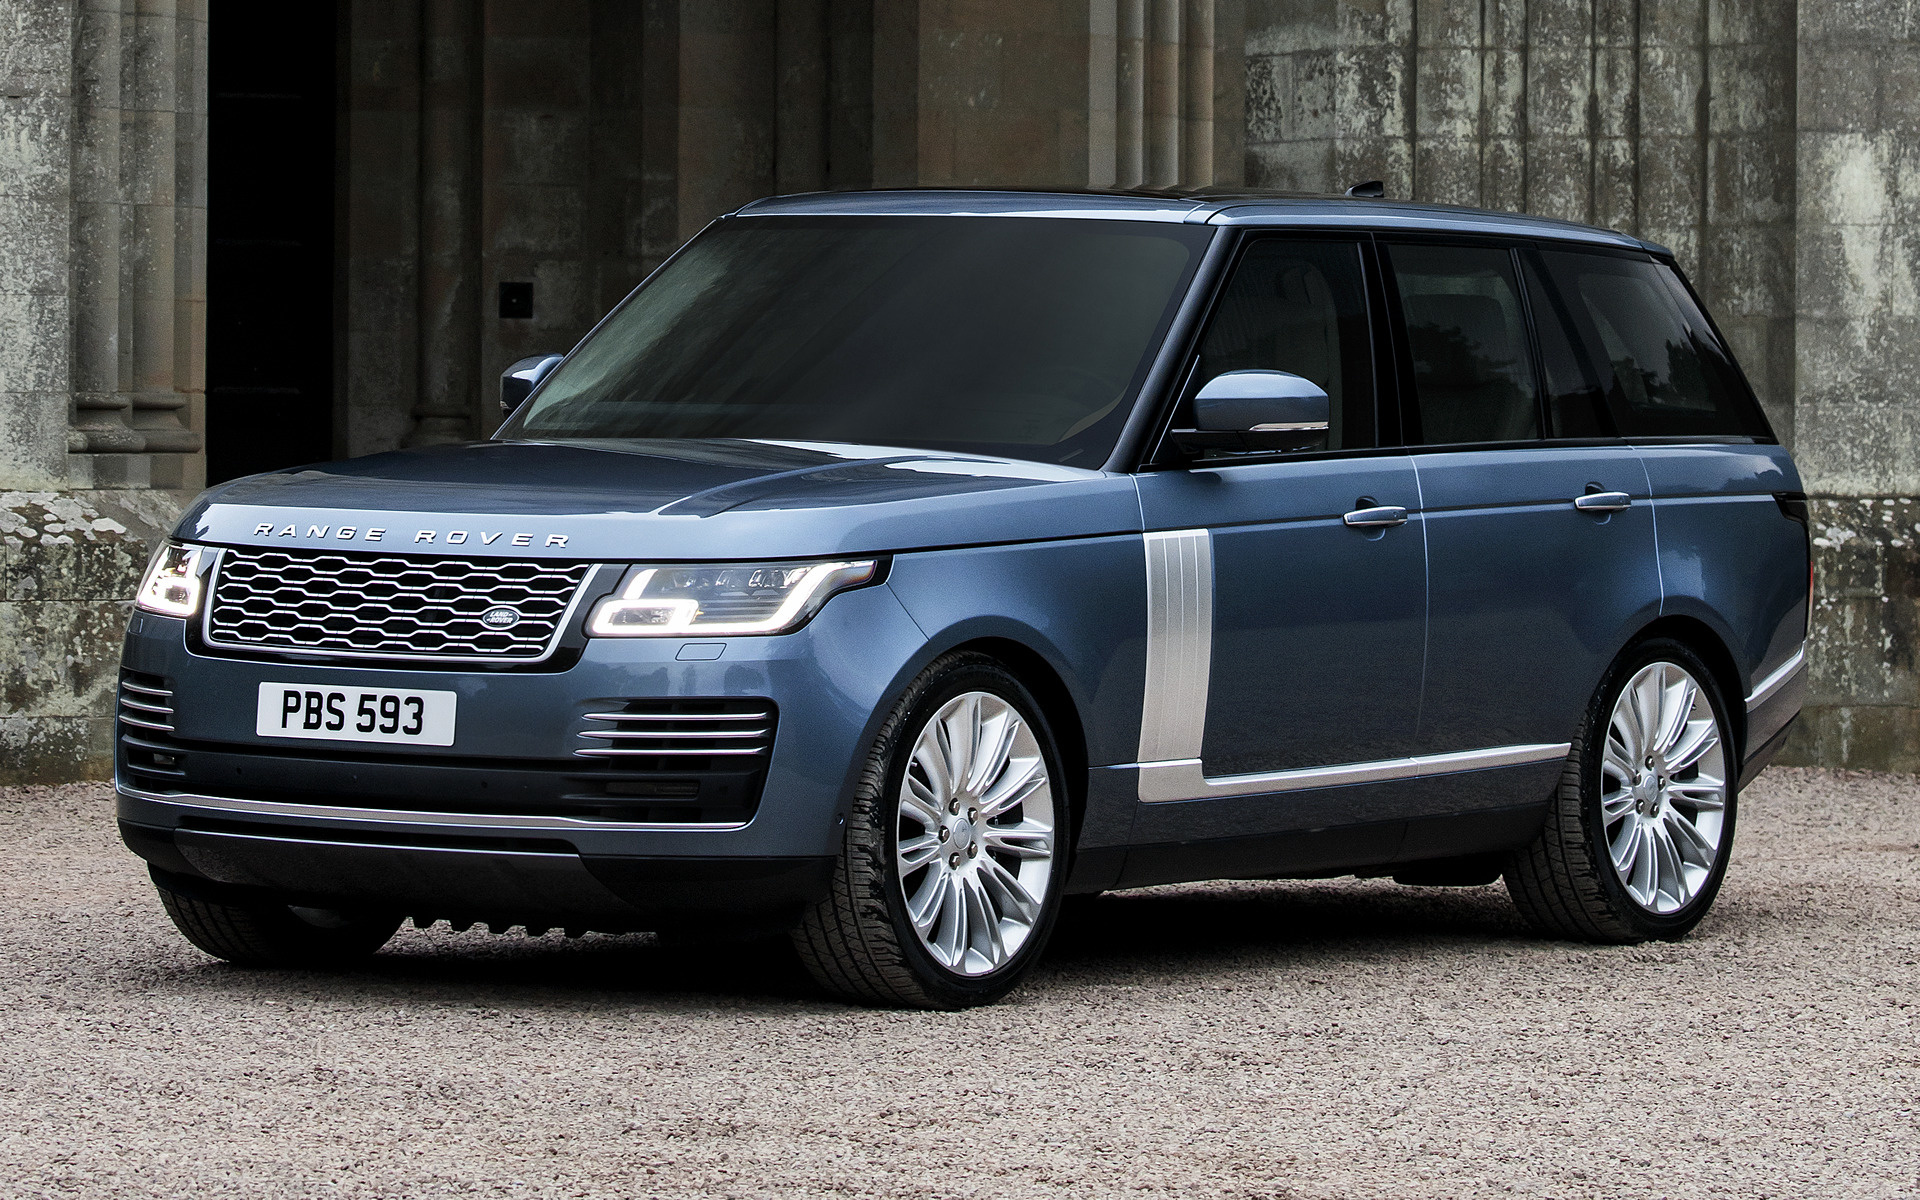 Range Rover Autobiography and HD Image